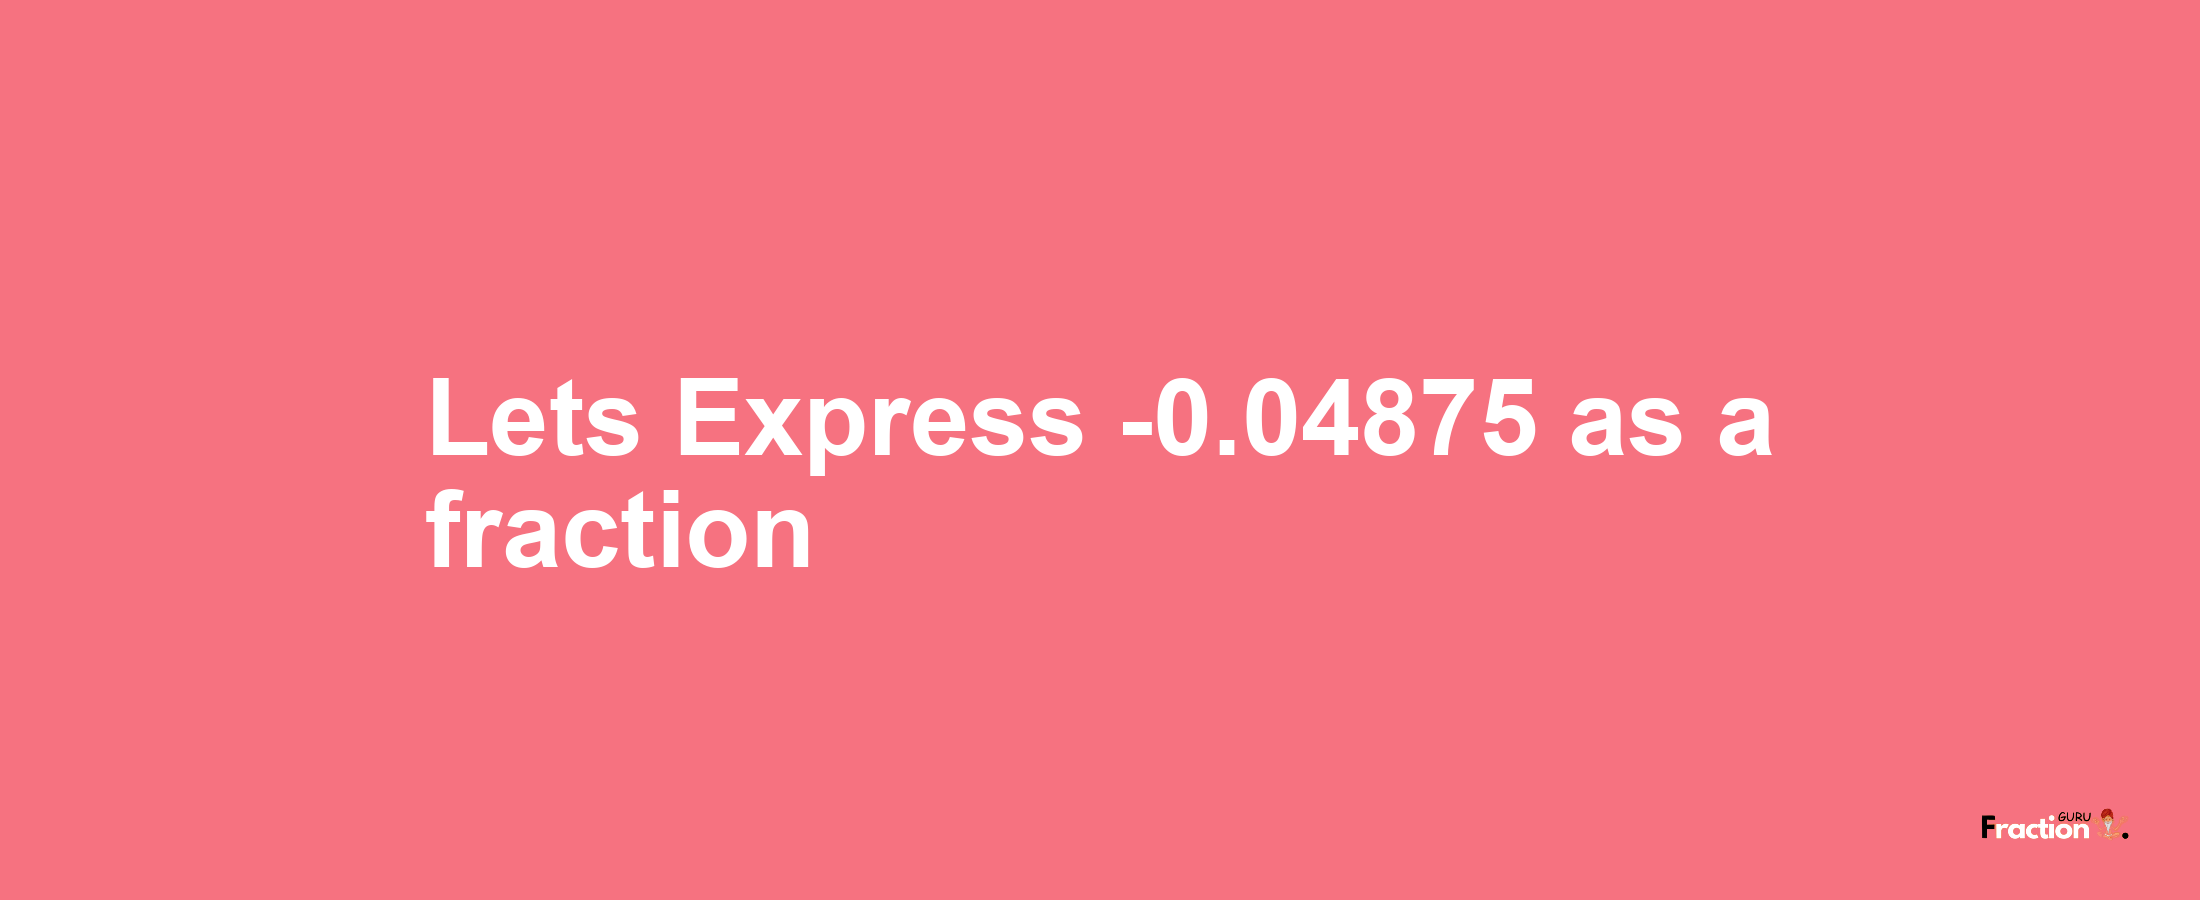 Lets Express -0.04875 as afraction